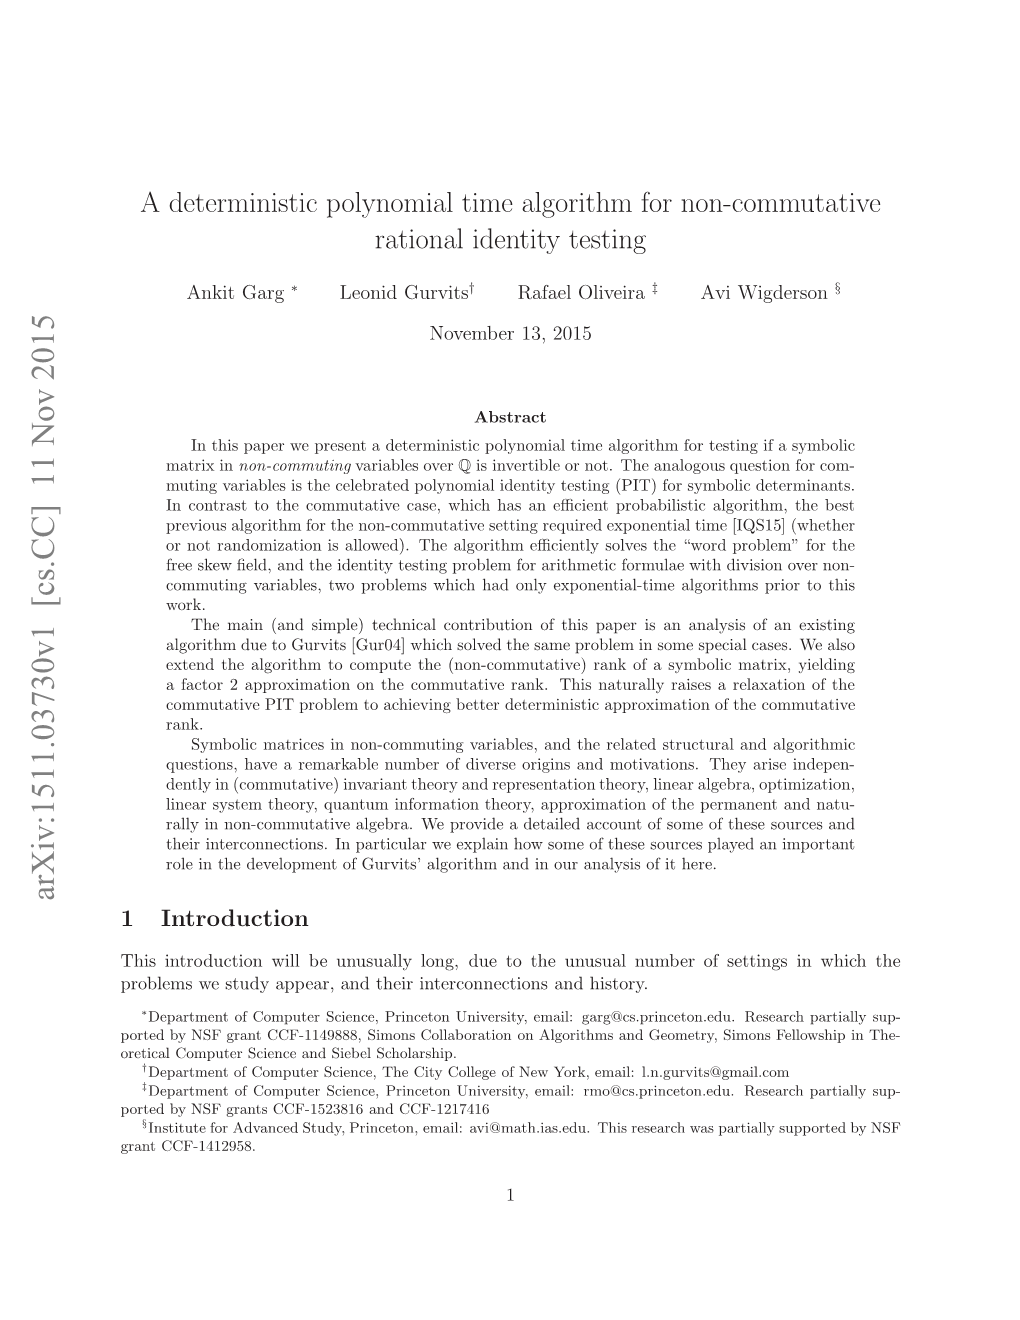 A Deterministic Polynomial Time Algorithm for Non-Commutative Rational Identity Testing